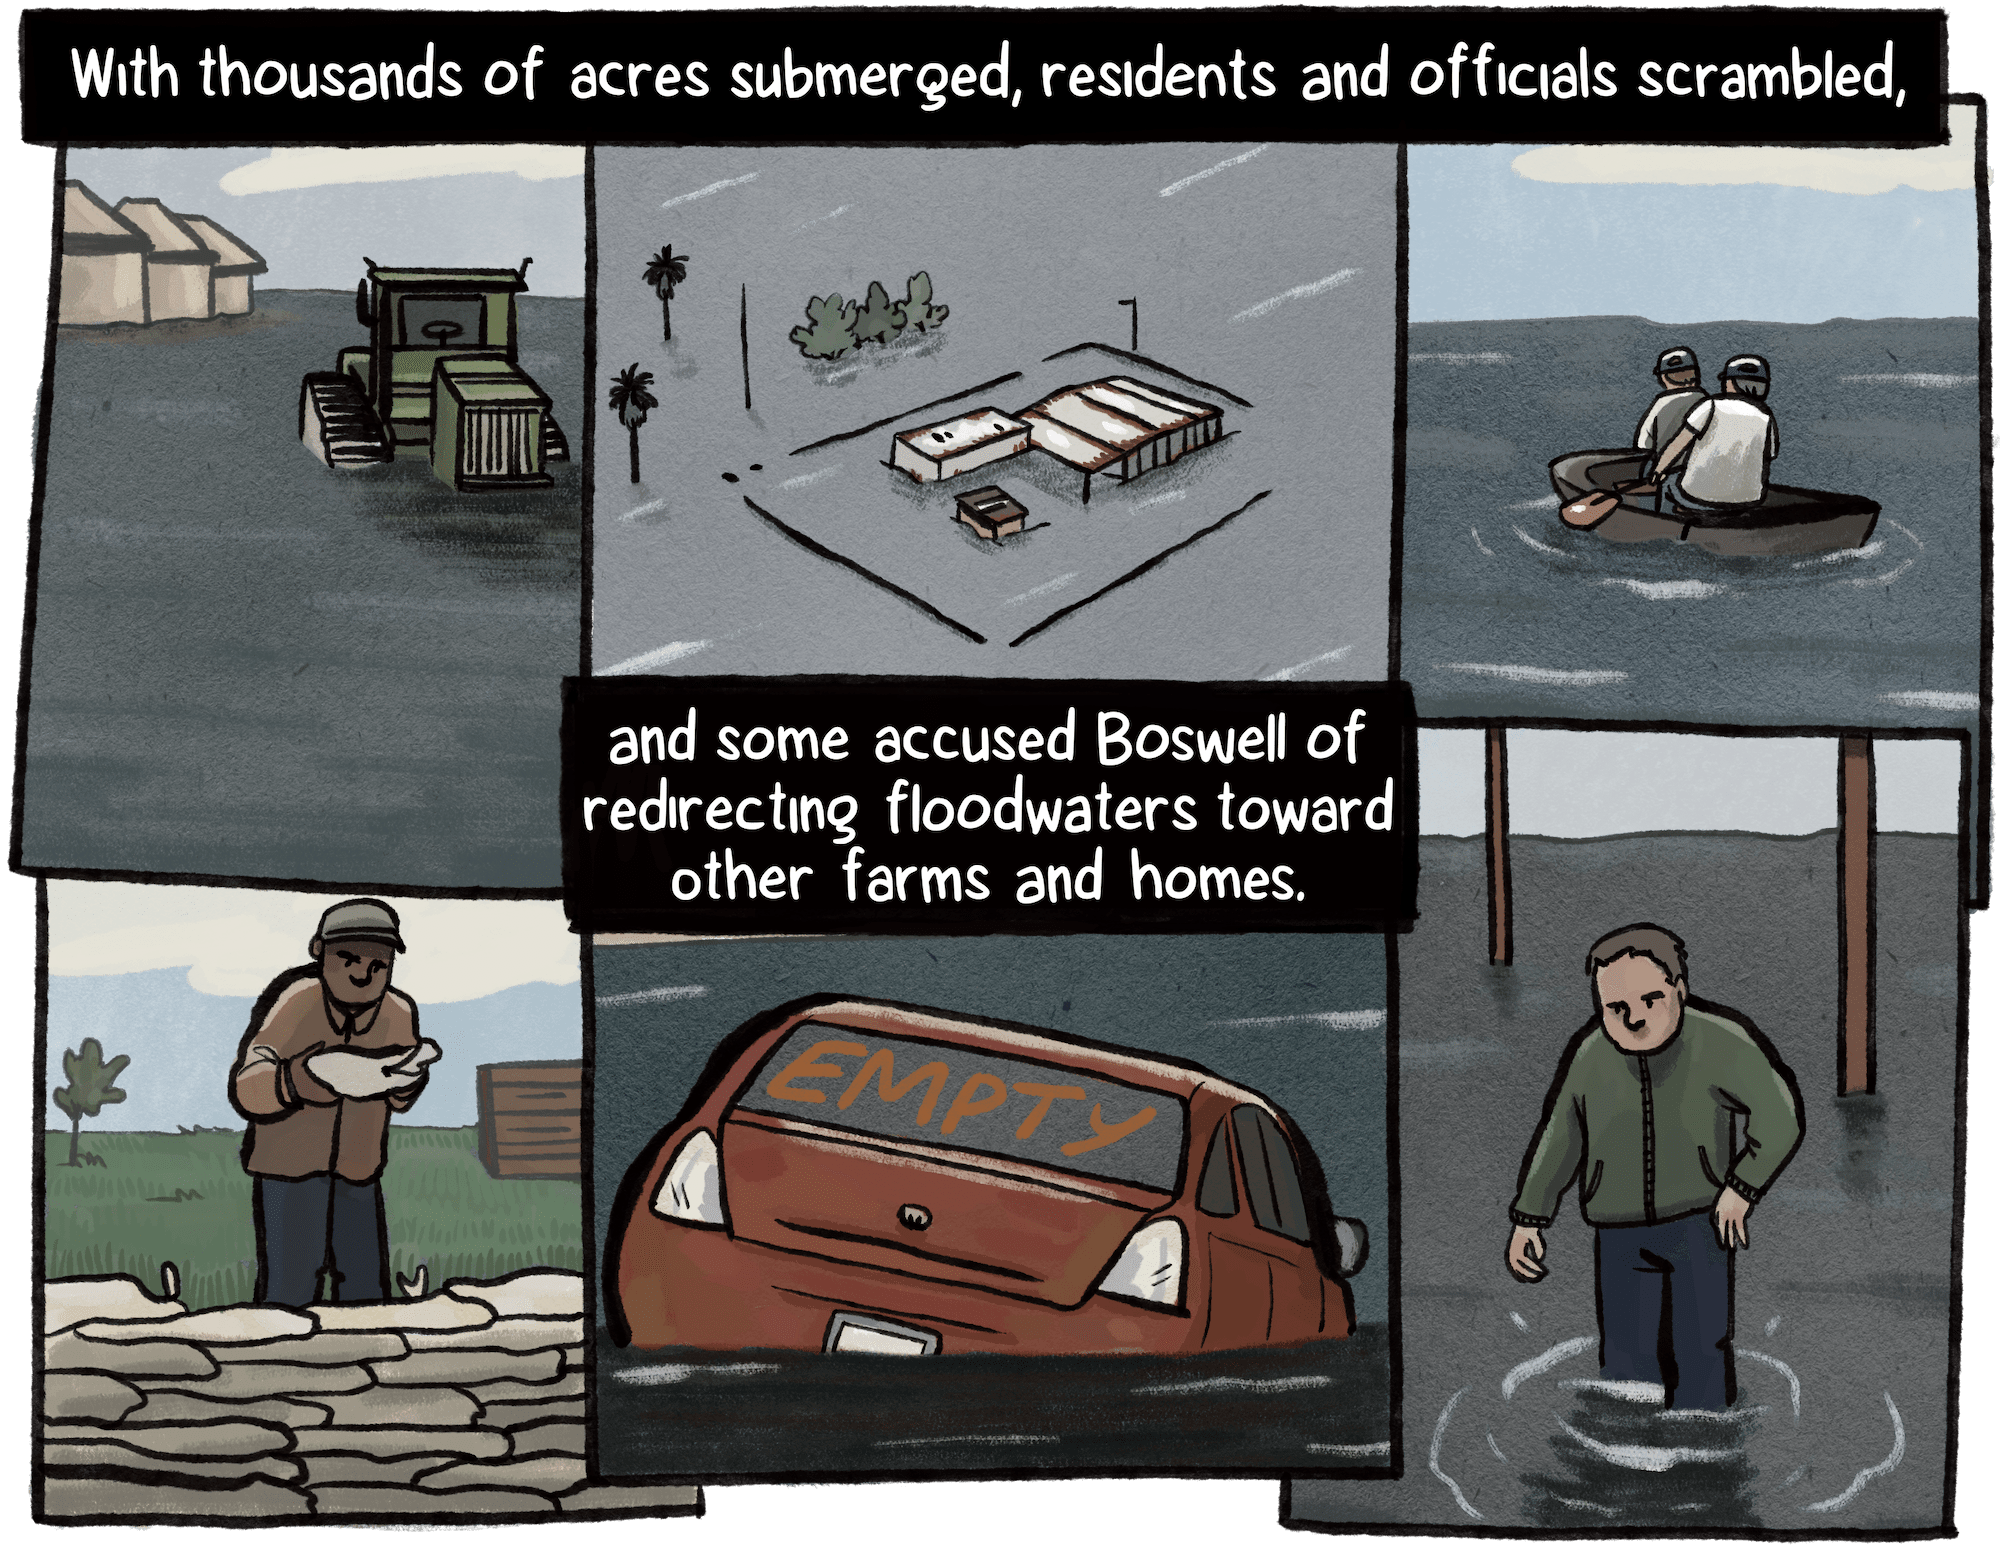 A series of panels show scenes of farm equipment, a house, and a car submerged; a man building a sandbag wall, another walking in knee-deep water and two people rowing a boat. As residents and officials scrambled, some accused Boswell of redirecting floodwaters to other farms and homes.